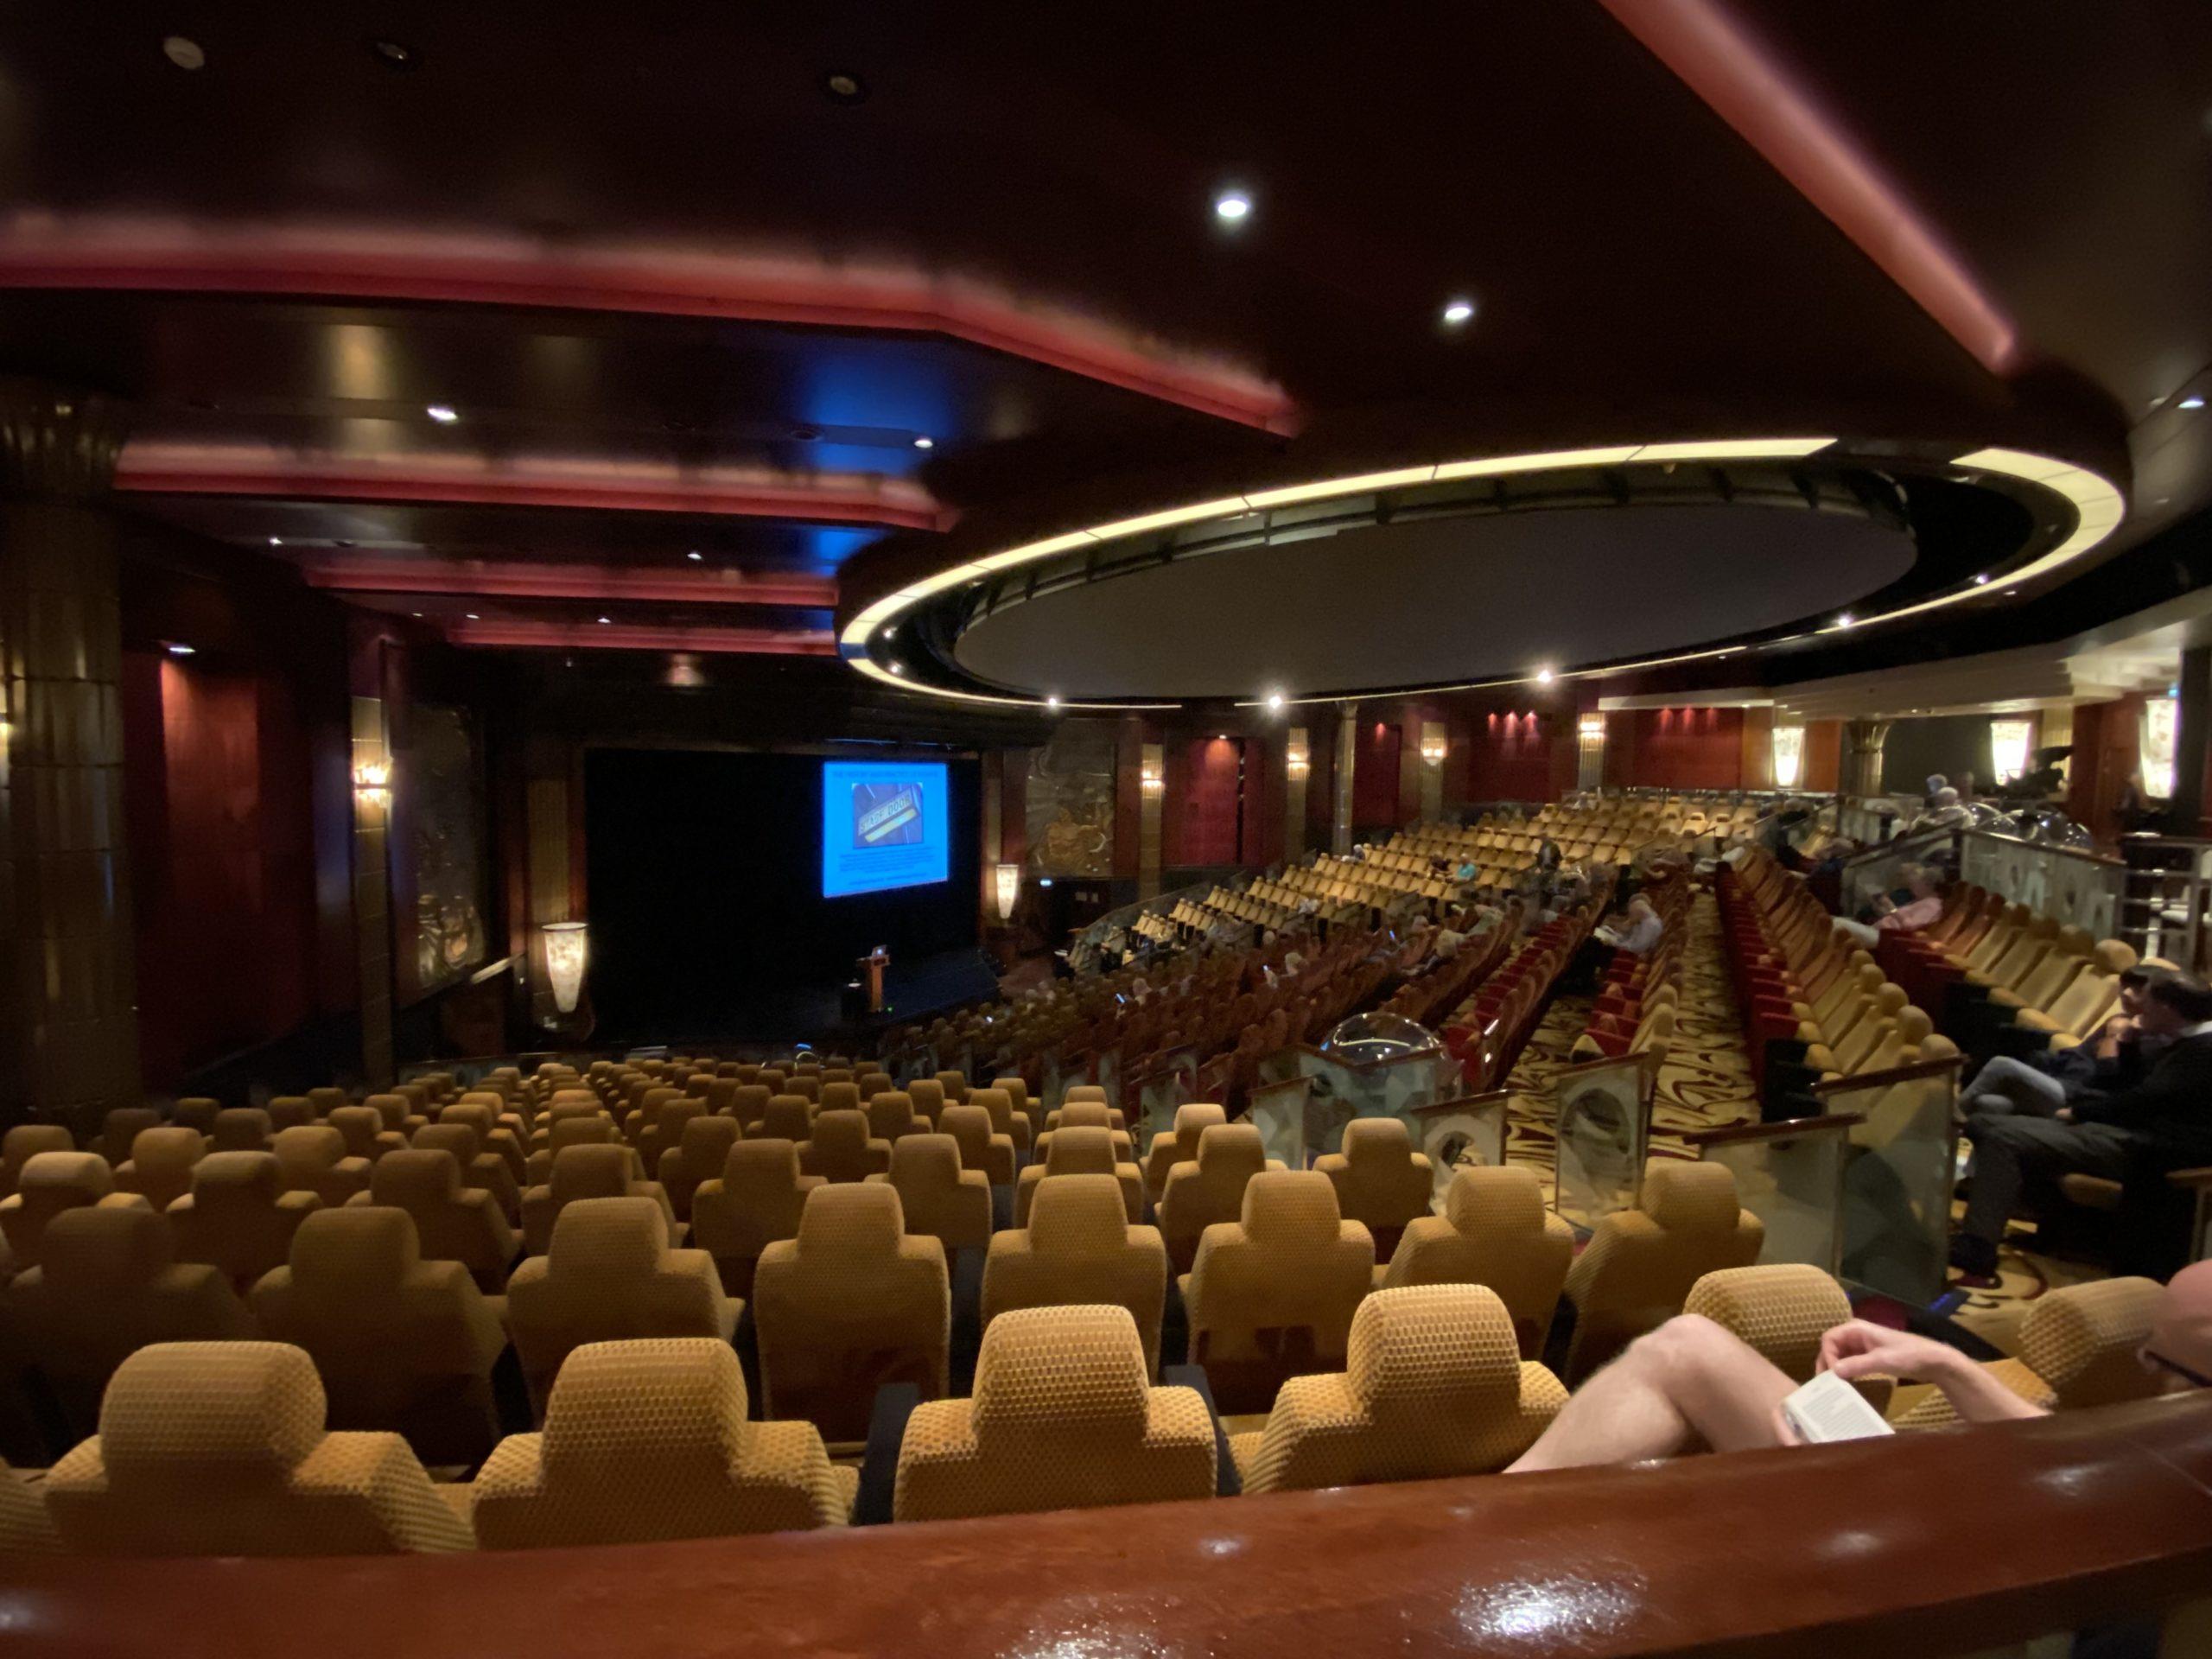 A large auditorium in reds golds, and beiges, with a dome screen set into the ceiling.